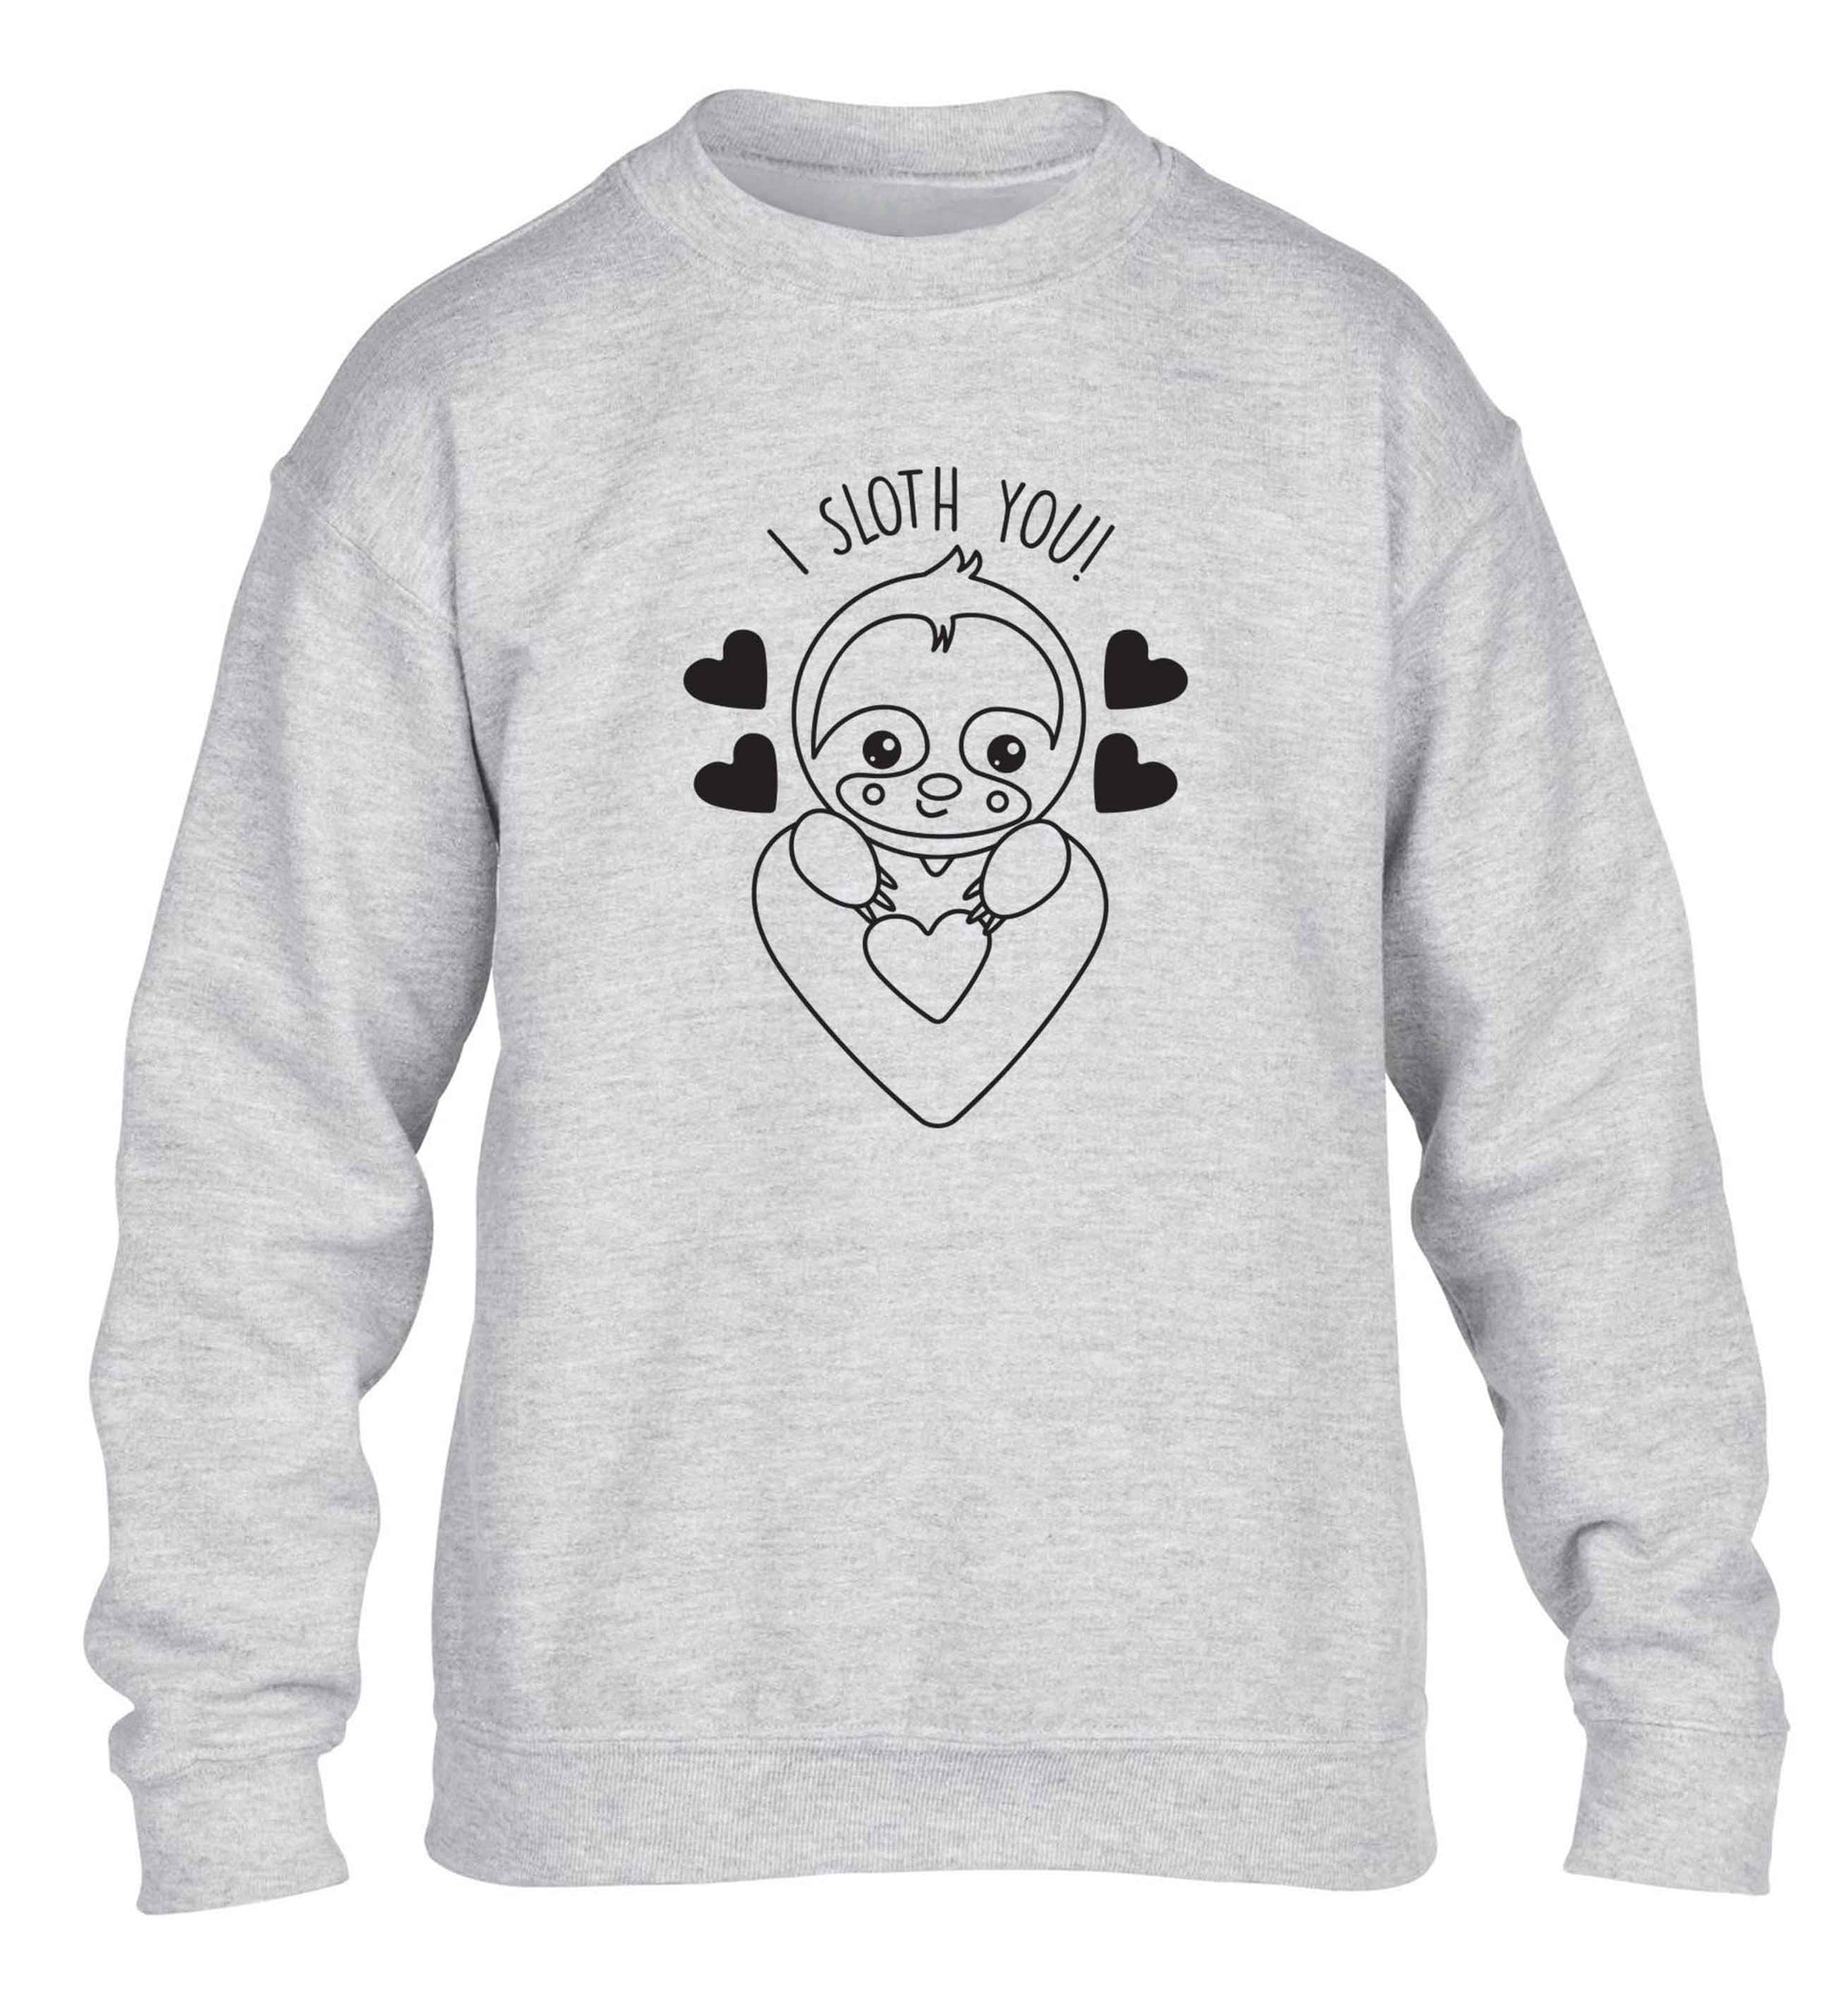 I sloth you children's grey sweater 12-13 Years